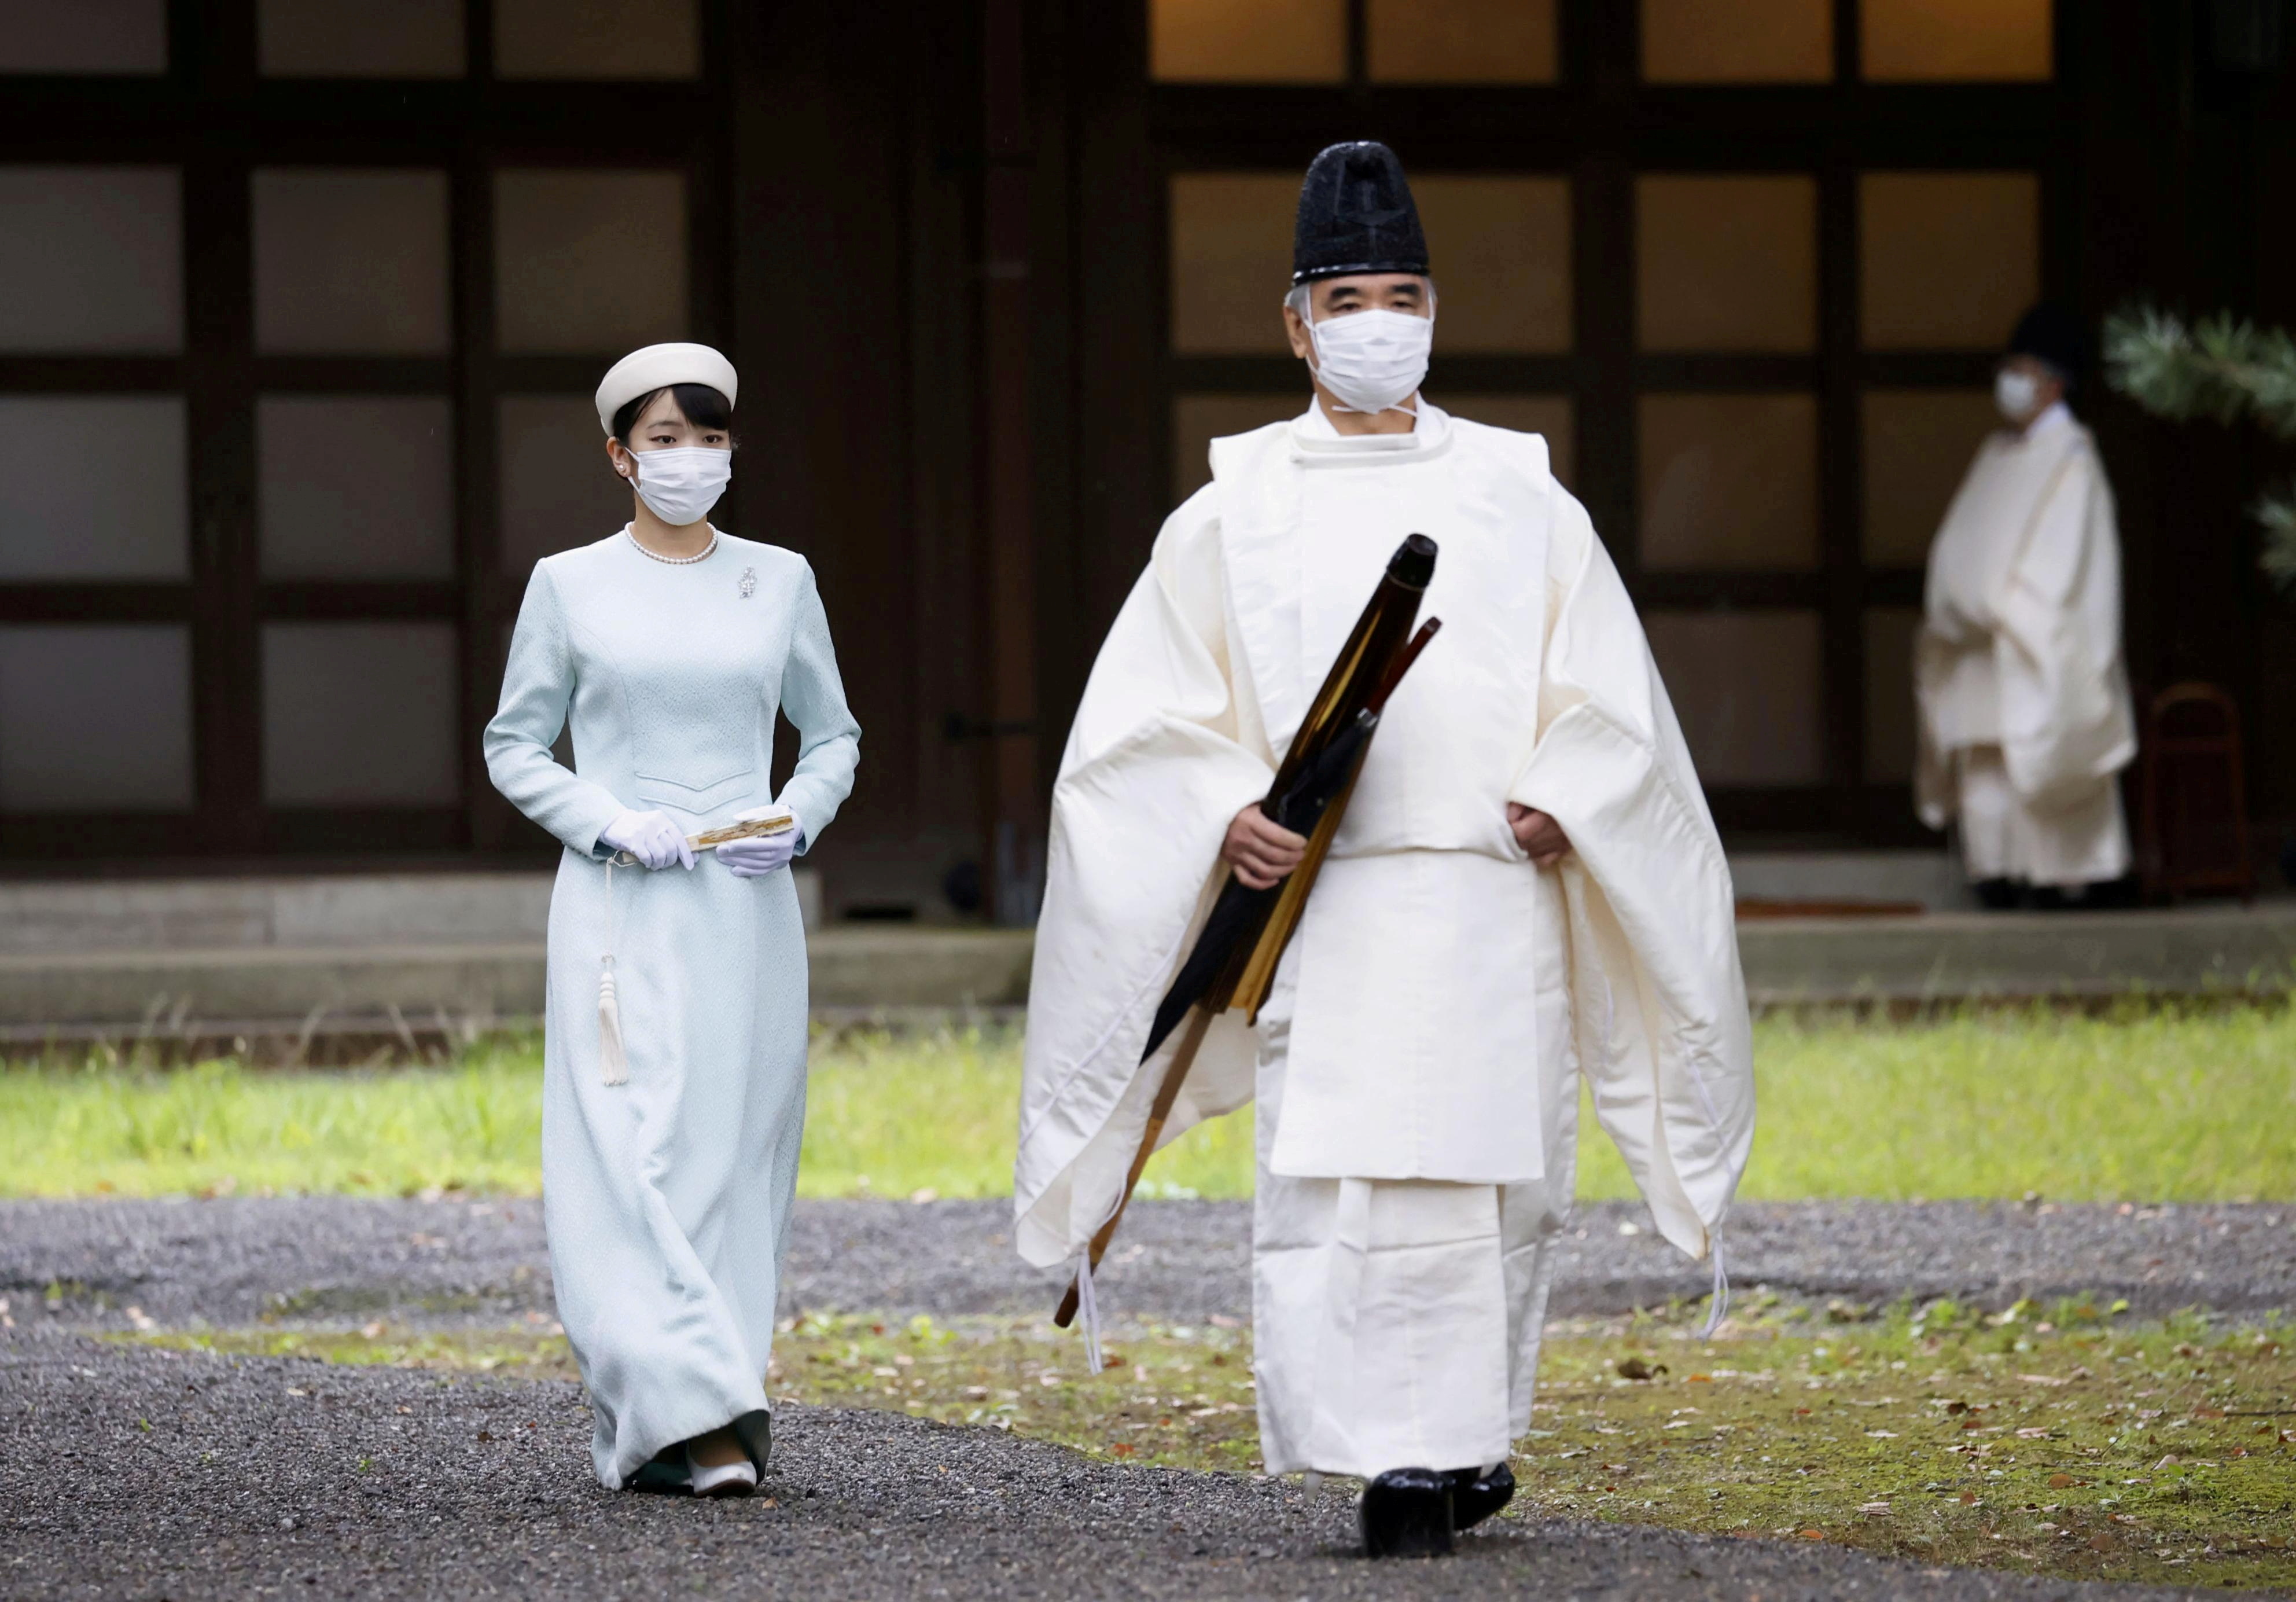 Japan's Princess Mako, the daughter of Crown Prince Akishino and Crown Princess Kiko, walks towards the Three Palace Sanctuaries to pray ahead of her marriage at the Imperial Palace in Tokyo, Japan October 19, 2021, in this photo taken by Kyodo. Mandatory credit Kyodo/via REUTERS  